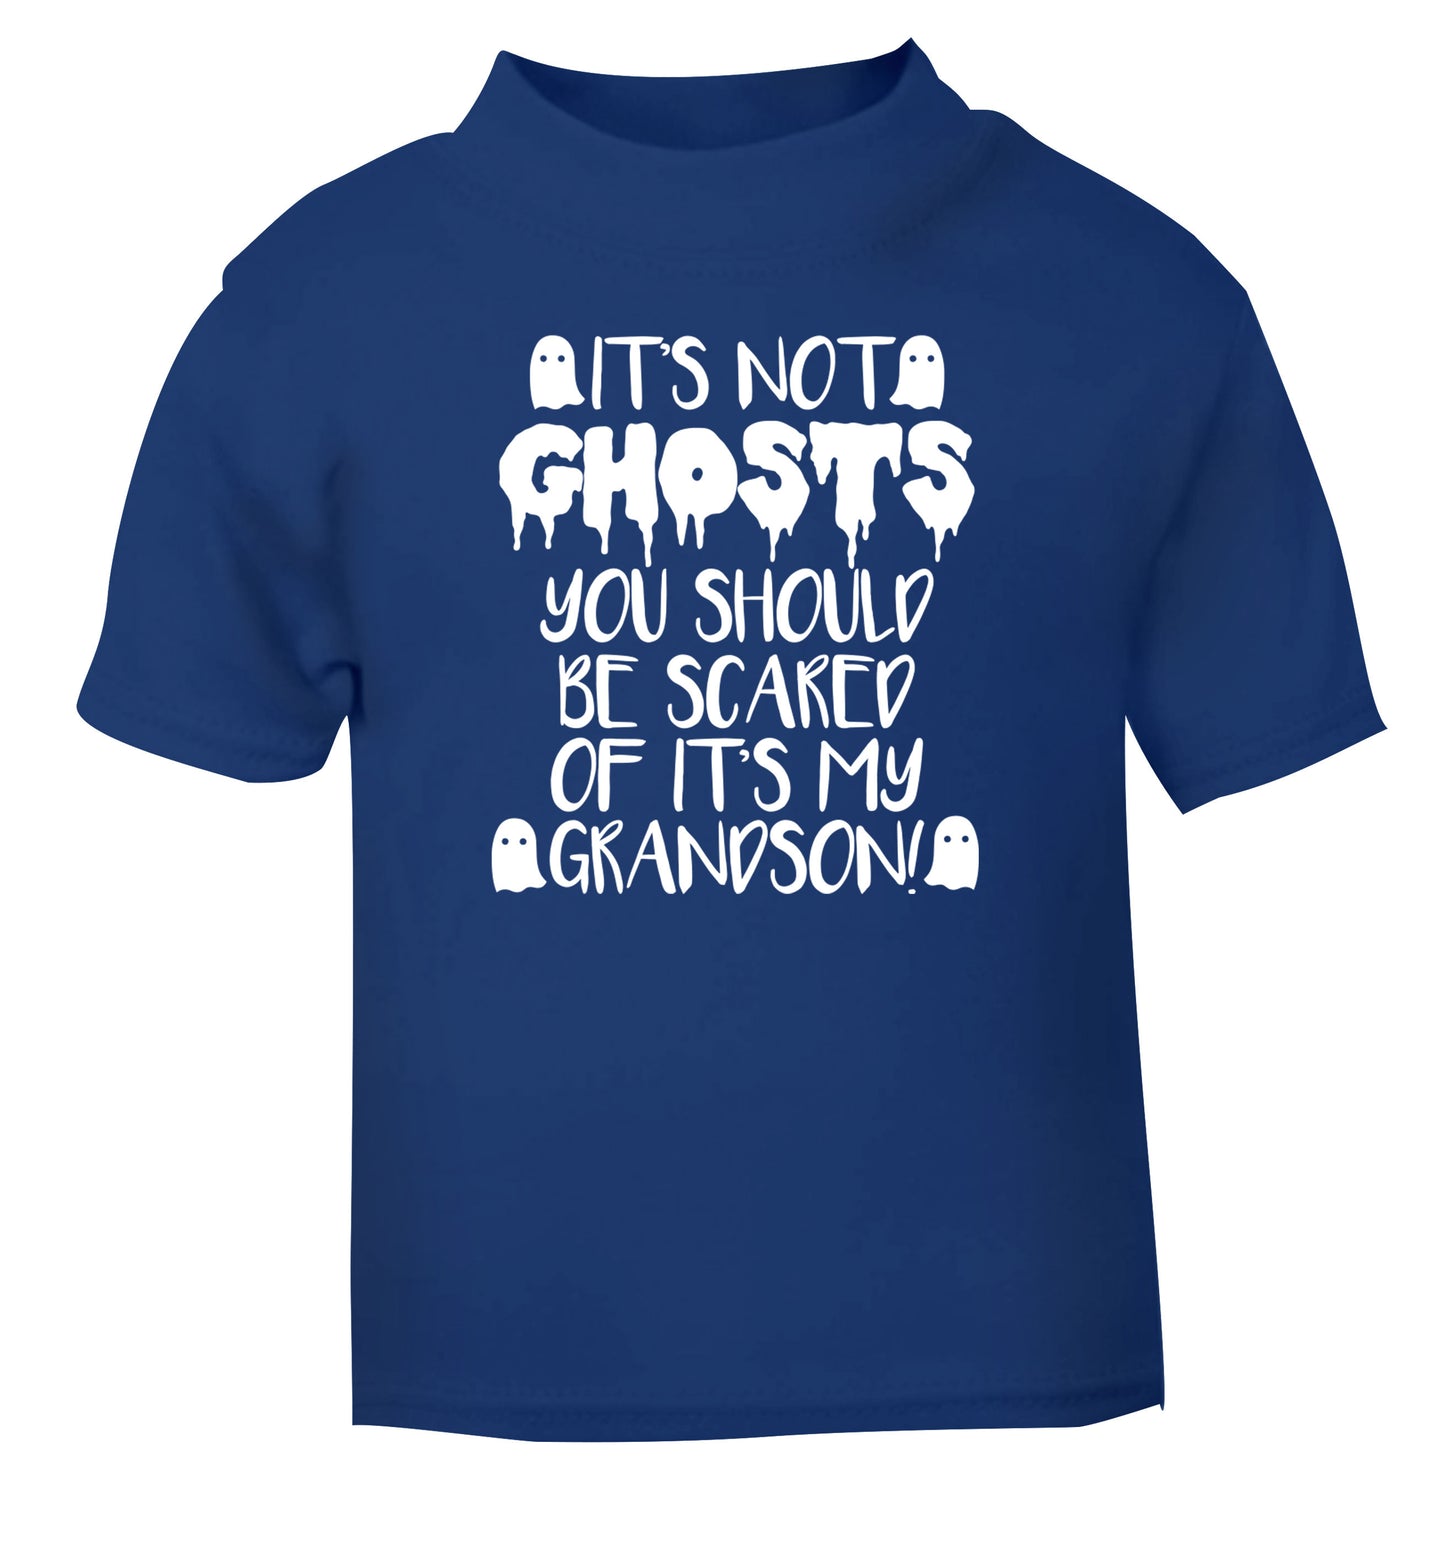 It's not ghosts you should be scared of it's my grandson! blue Baby Toddler Tshirt 2 Years